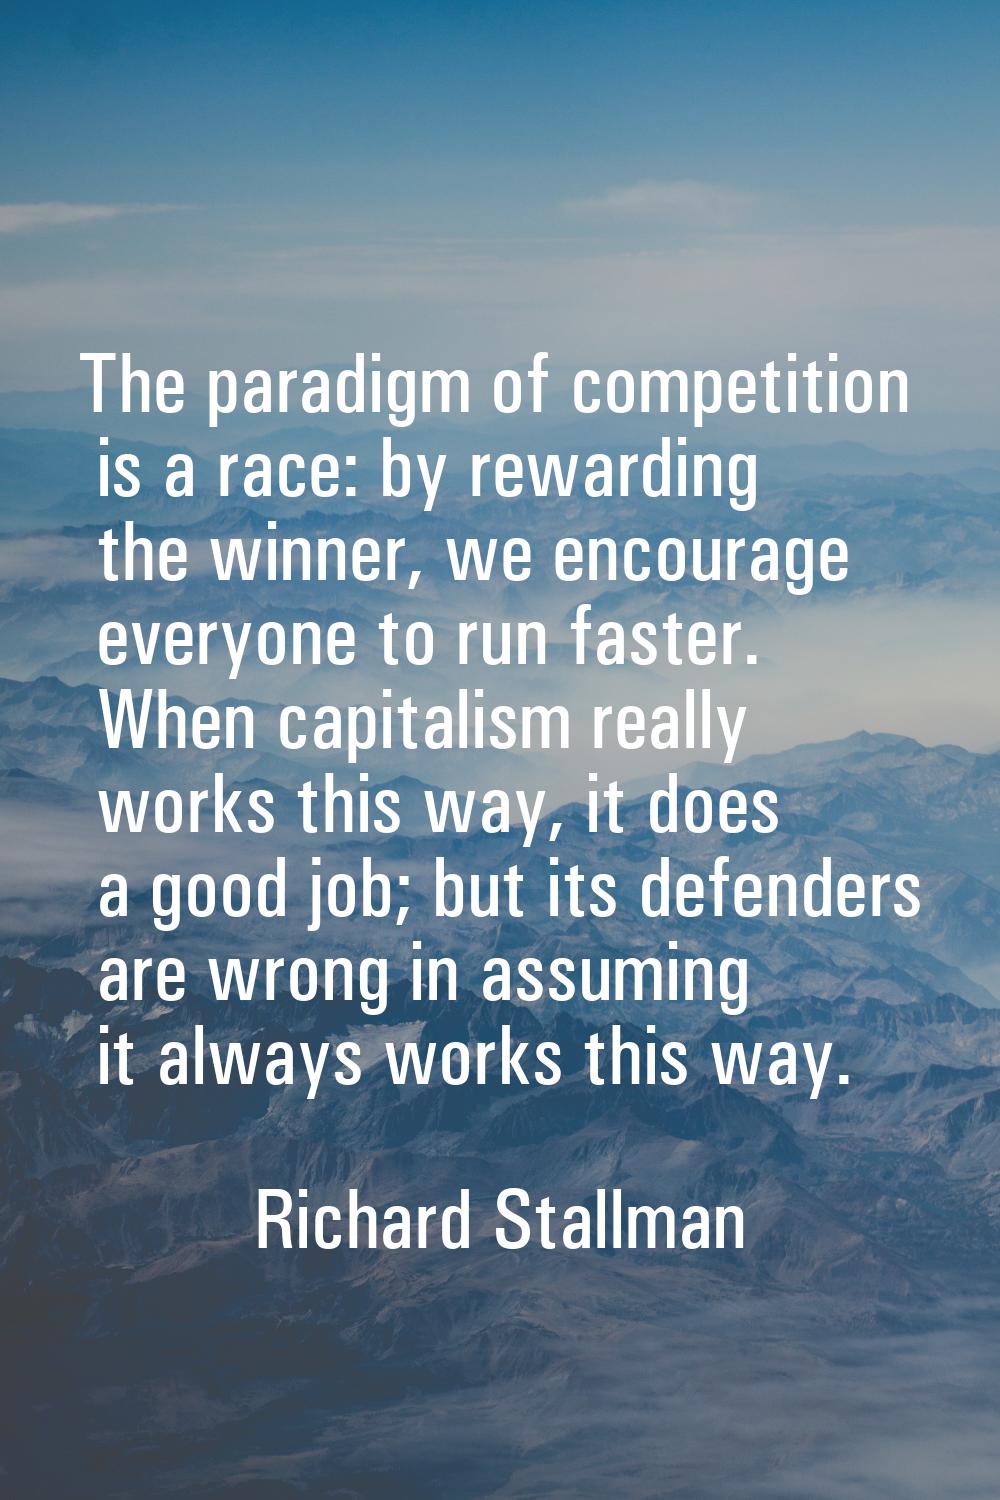 The paradigm of competition is a race: by rewarding the winner, we encourage everyone to run faster